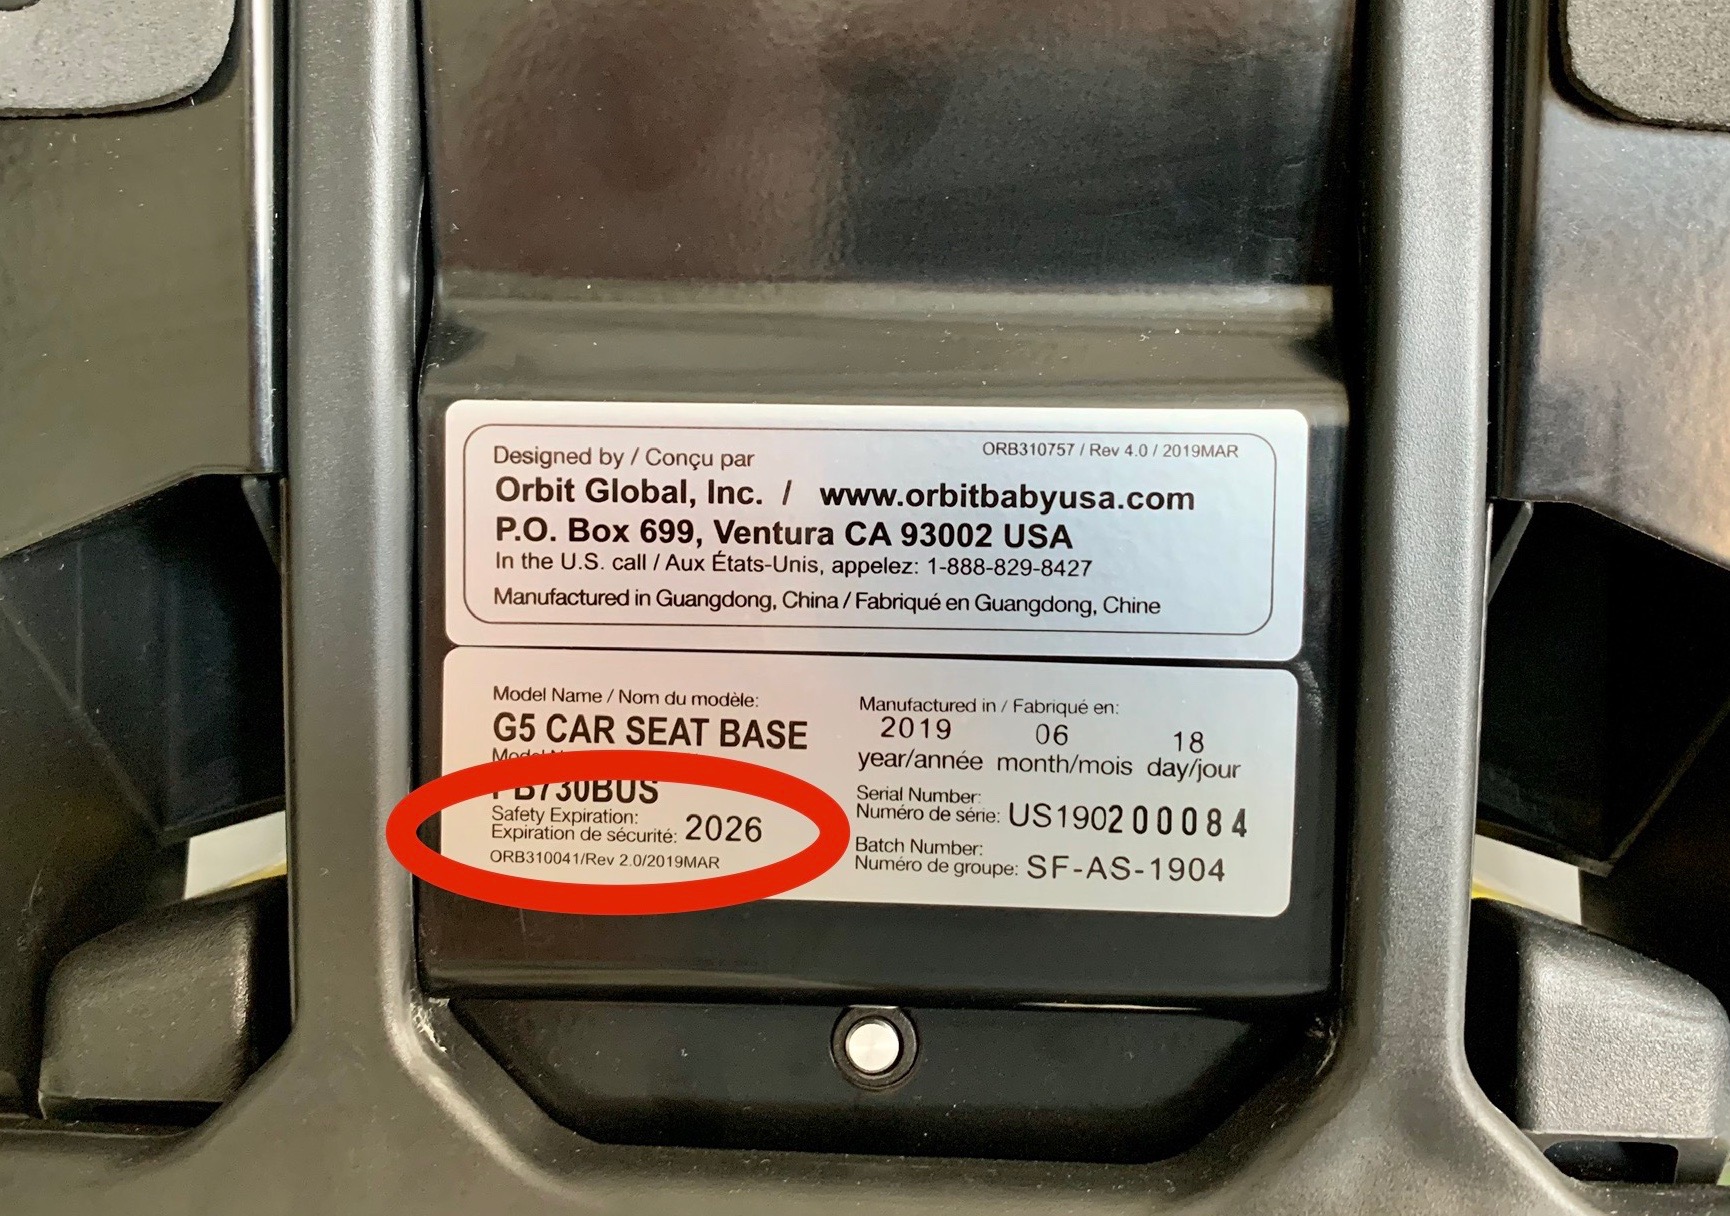 Does My Car Seat Expire When, Are There Expiration Dates On Car Seats